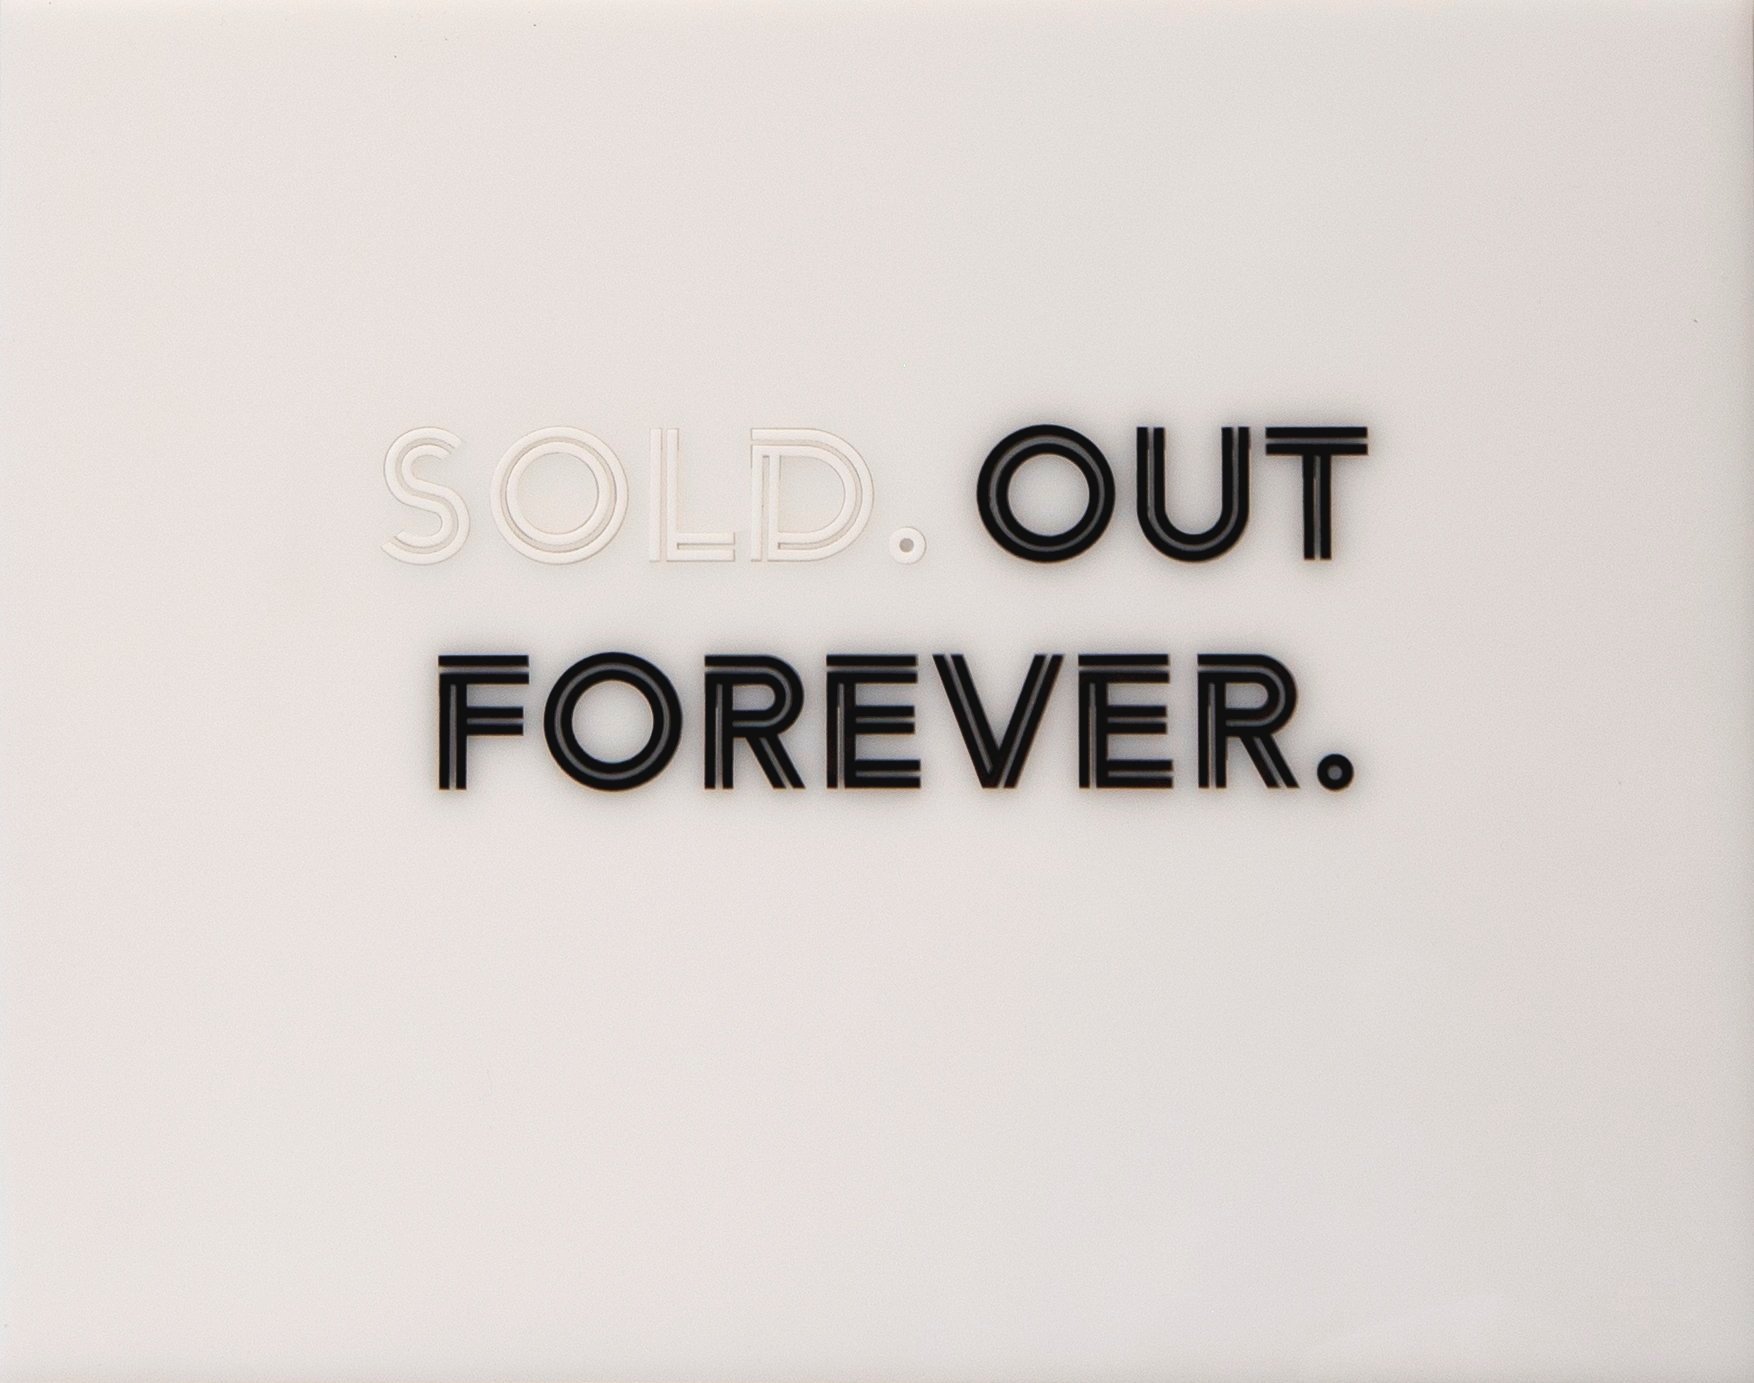 Sold Out Forever (b&w)